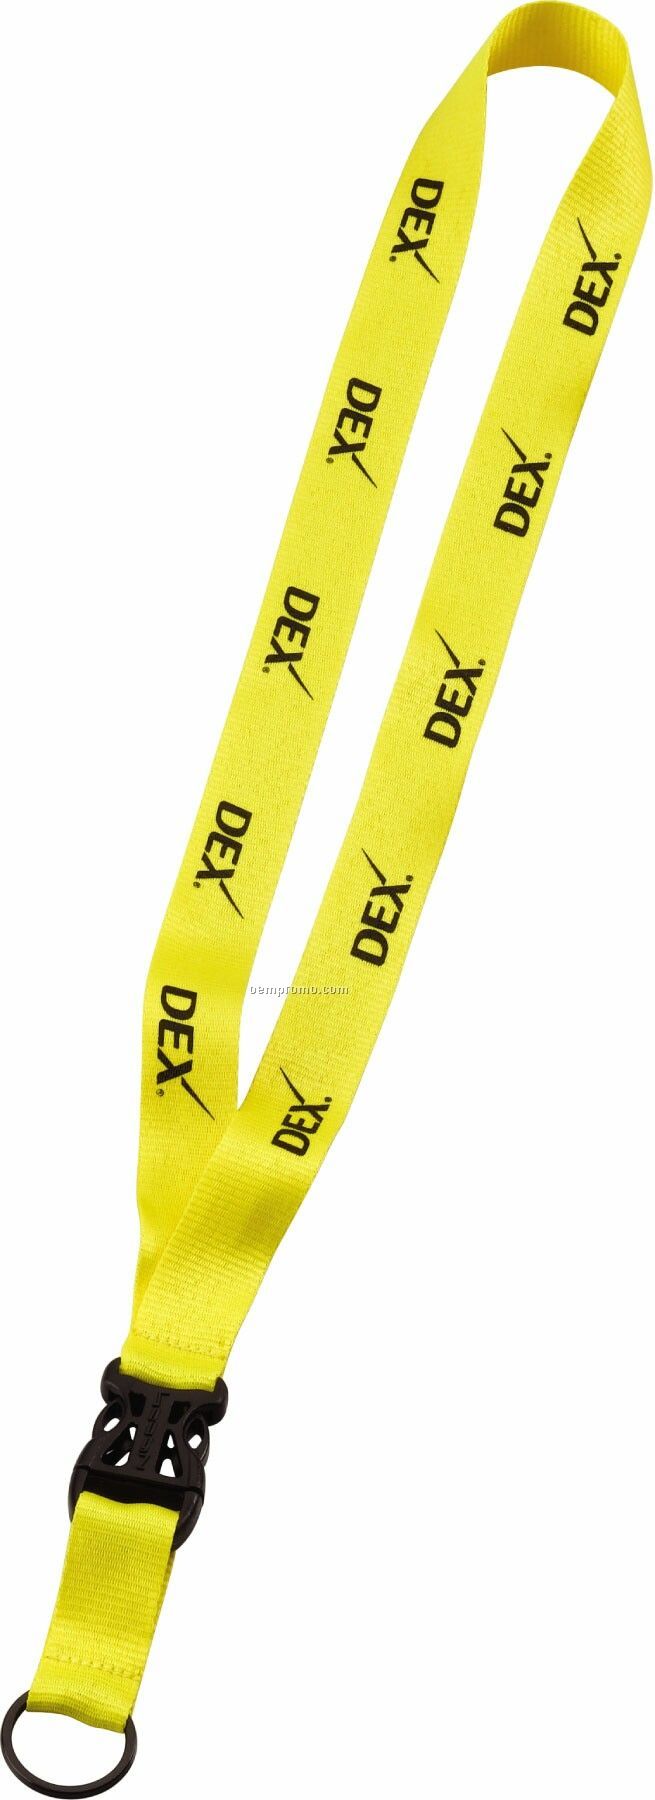 3/4" Polyester Snap Buckle Release Lanyard With Metal Split Ring